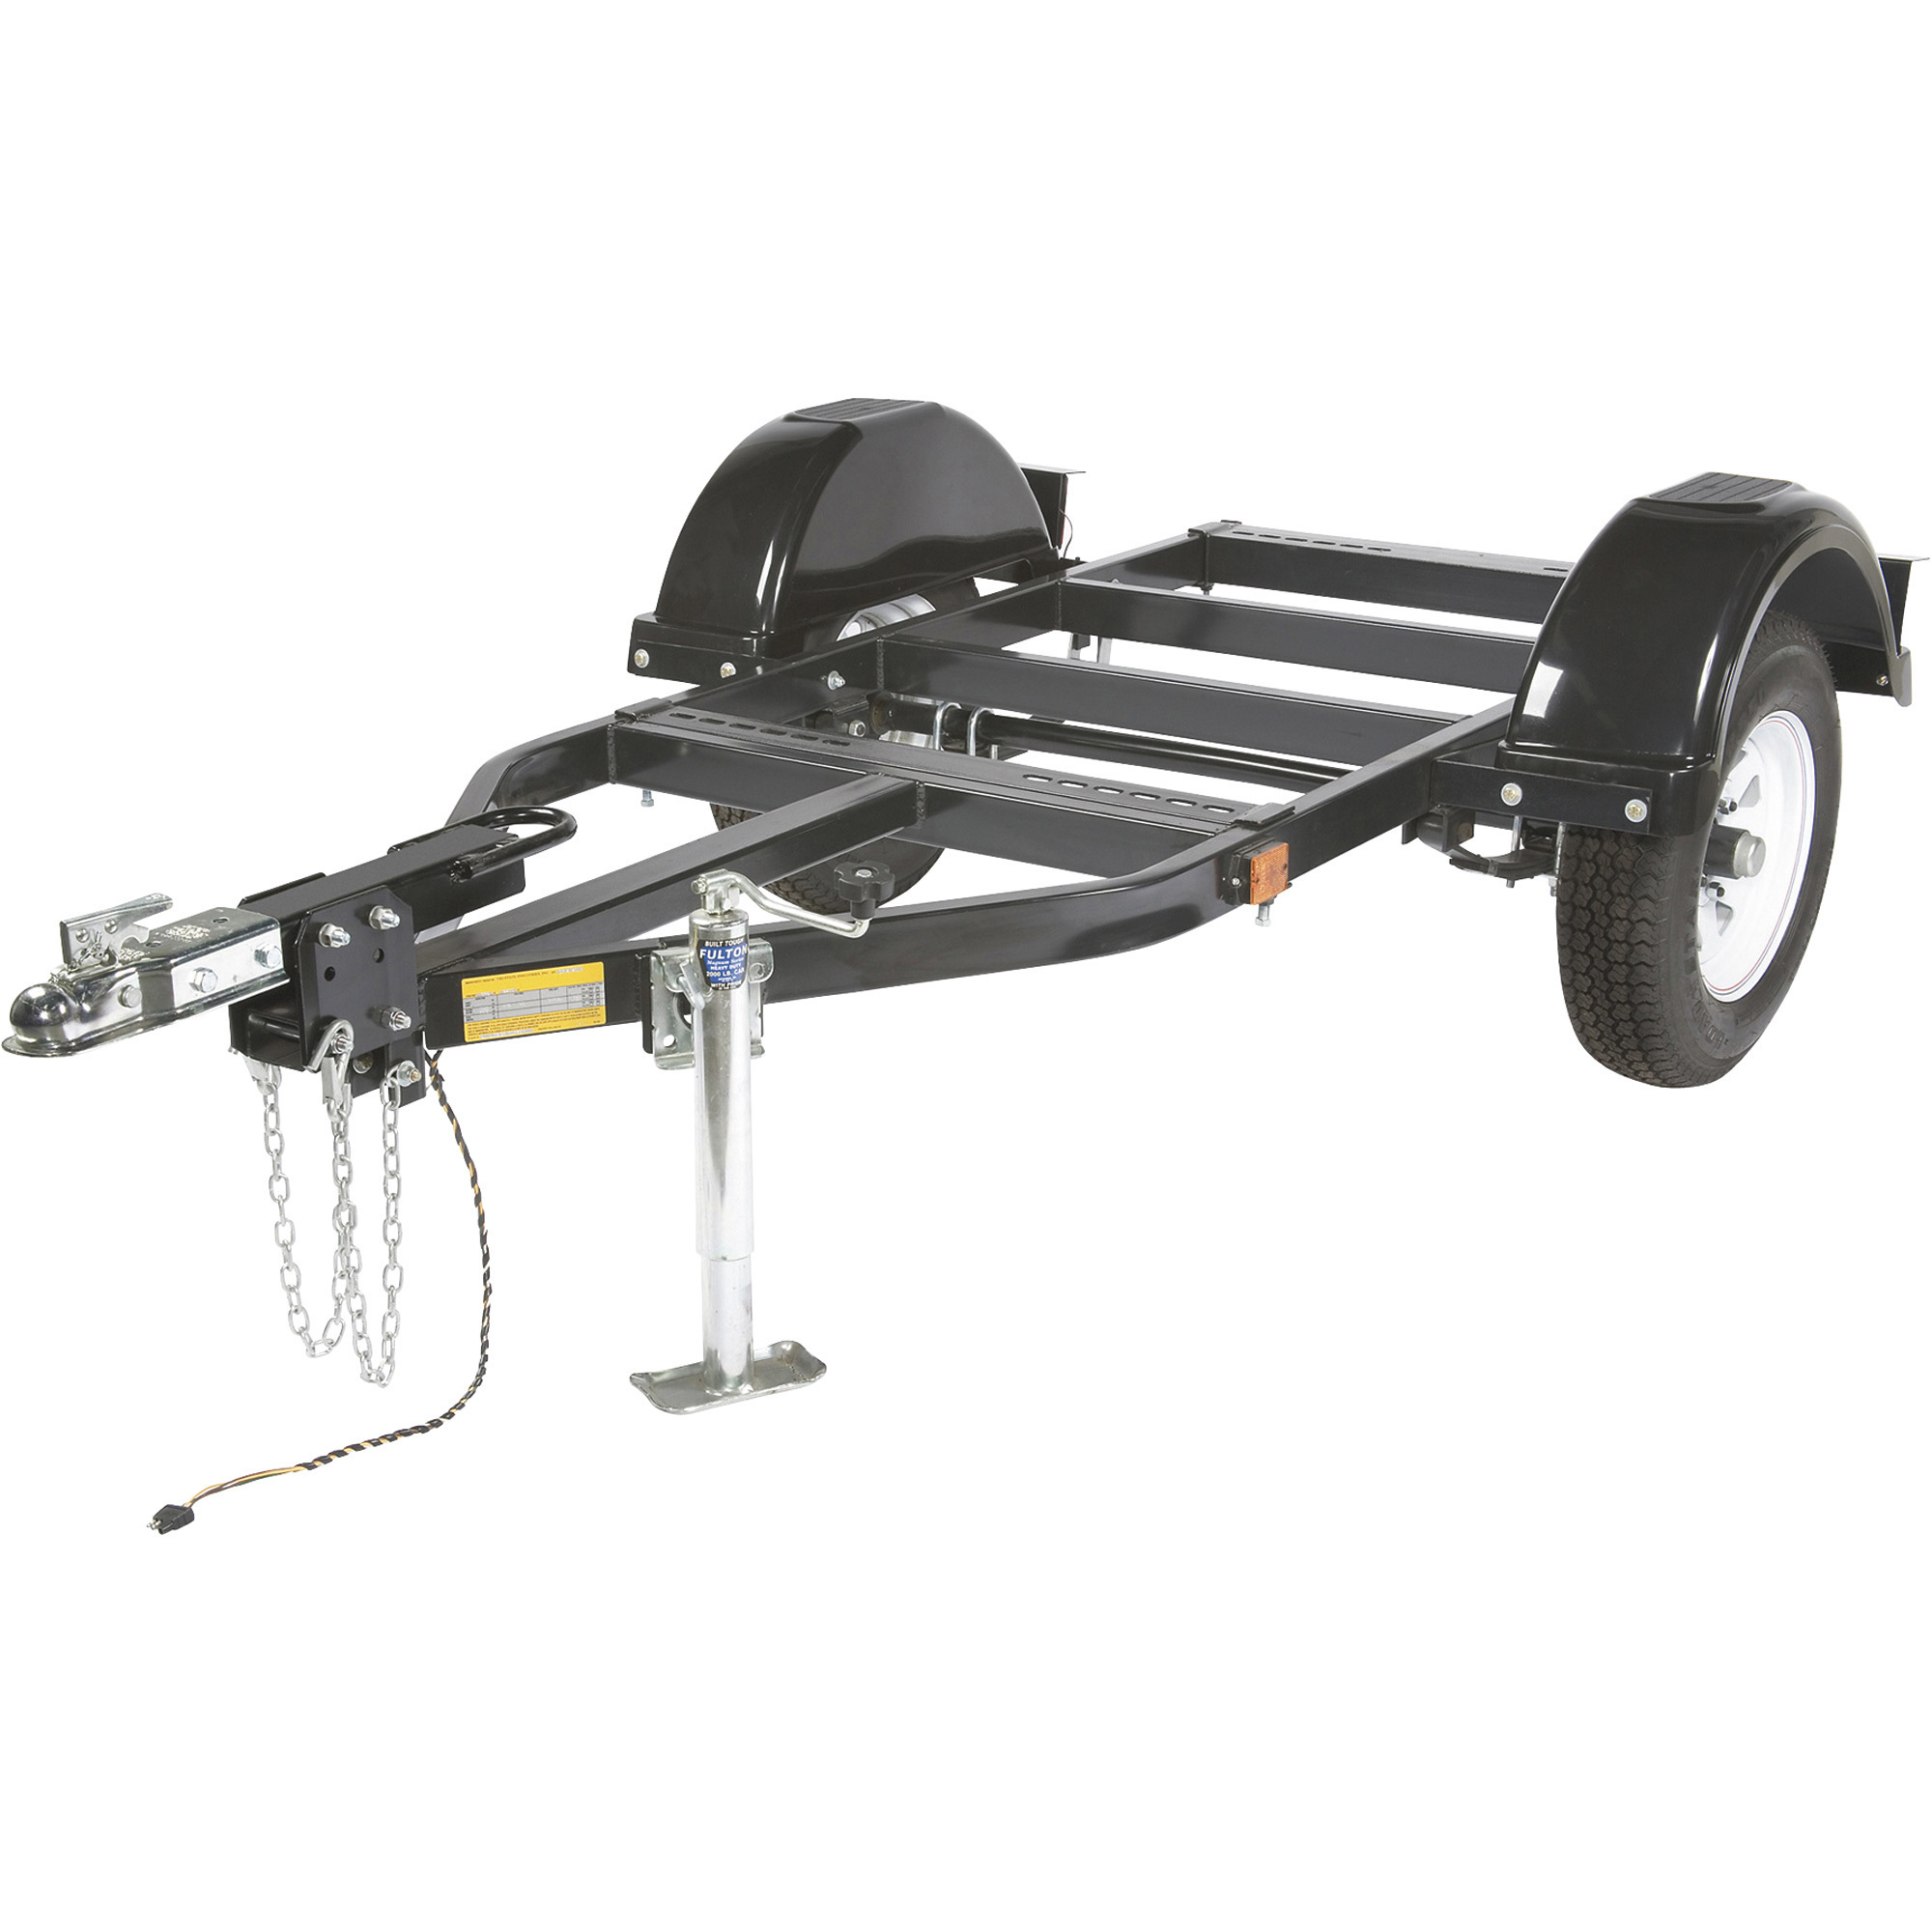 Lincoln Electric Experts 2-Wheel Road Trailer with Duo-Hitch, 120Inch L x 60Inch W, Model K2635-1